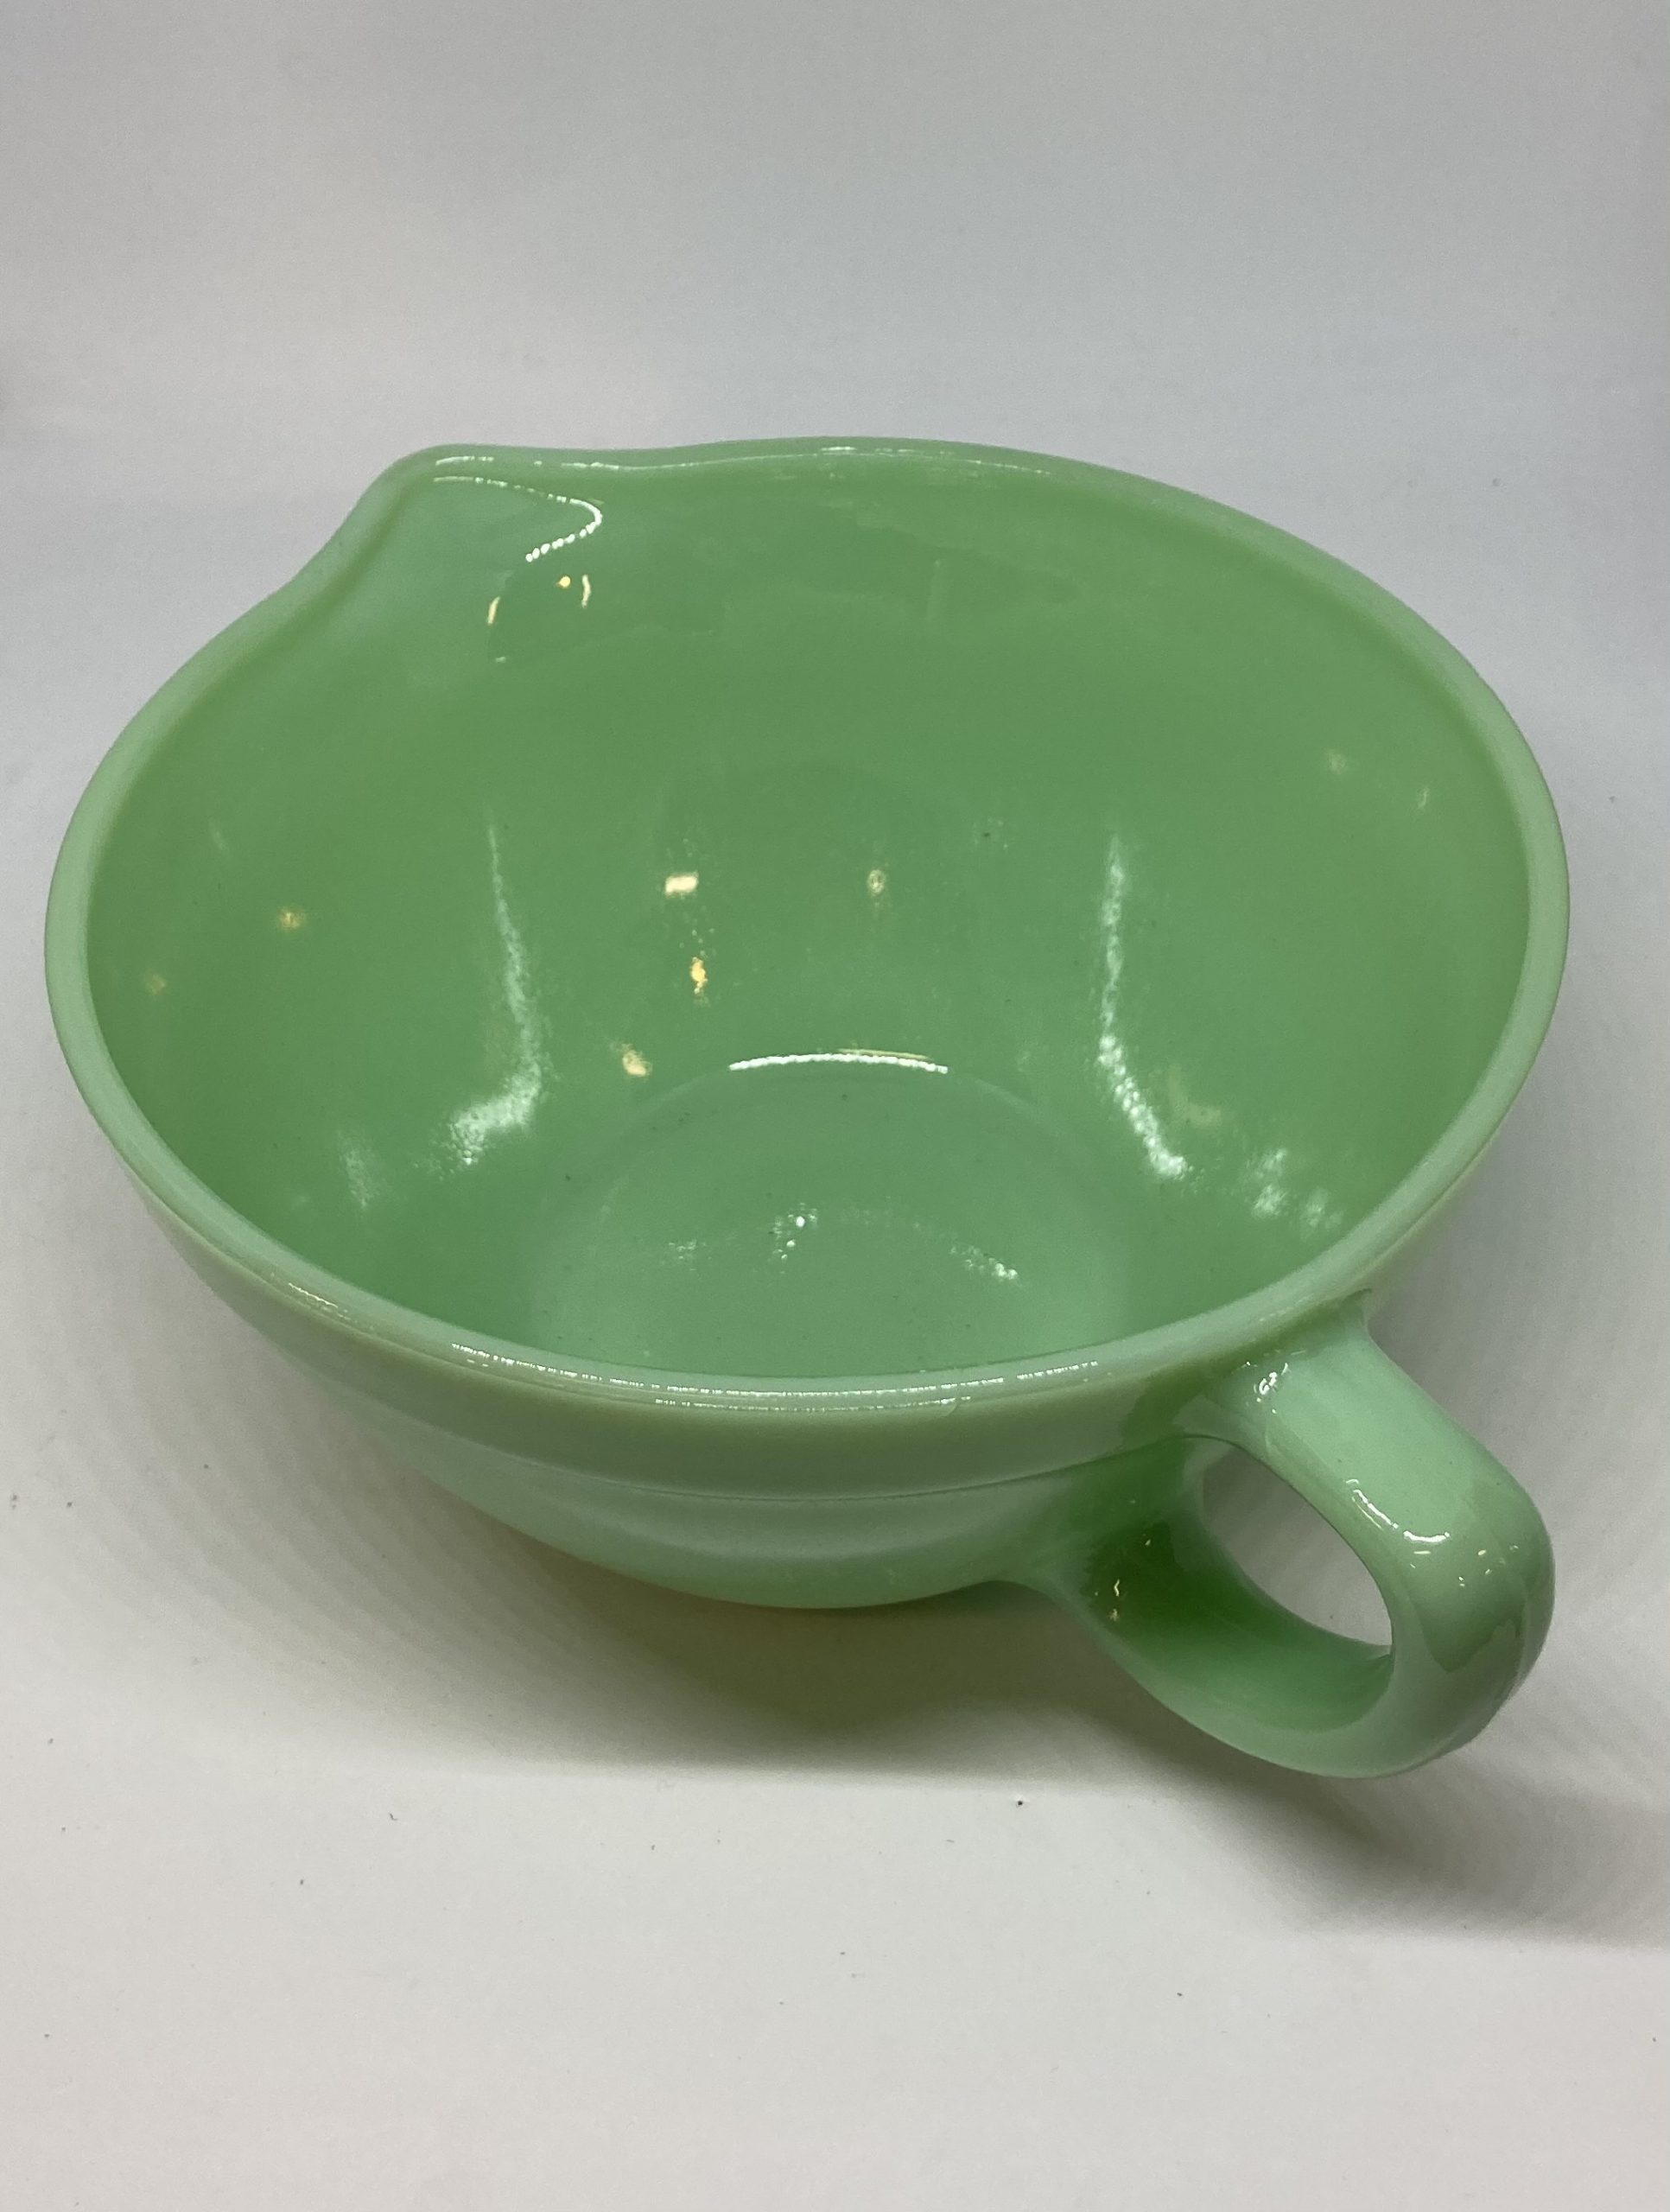 Tablecraft Jadeite Glass Collection 1.25 qt Mixing Bowl